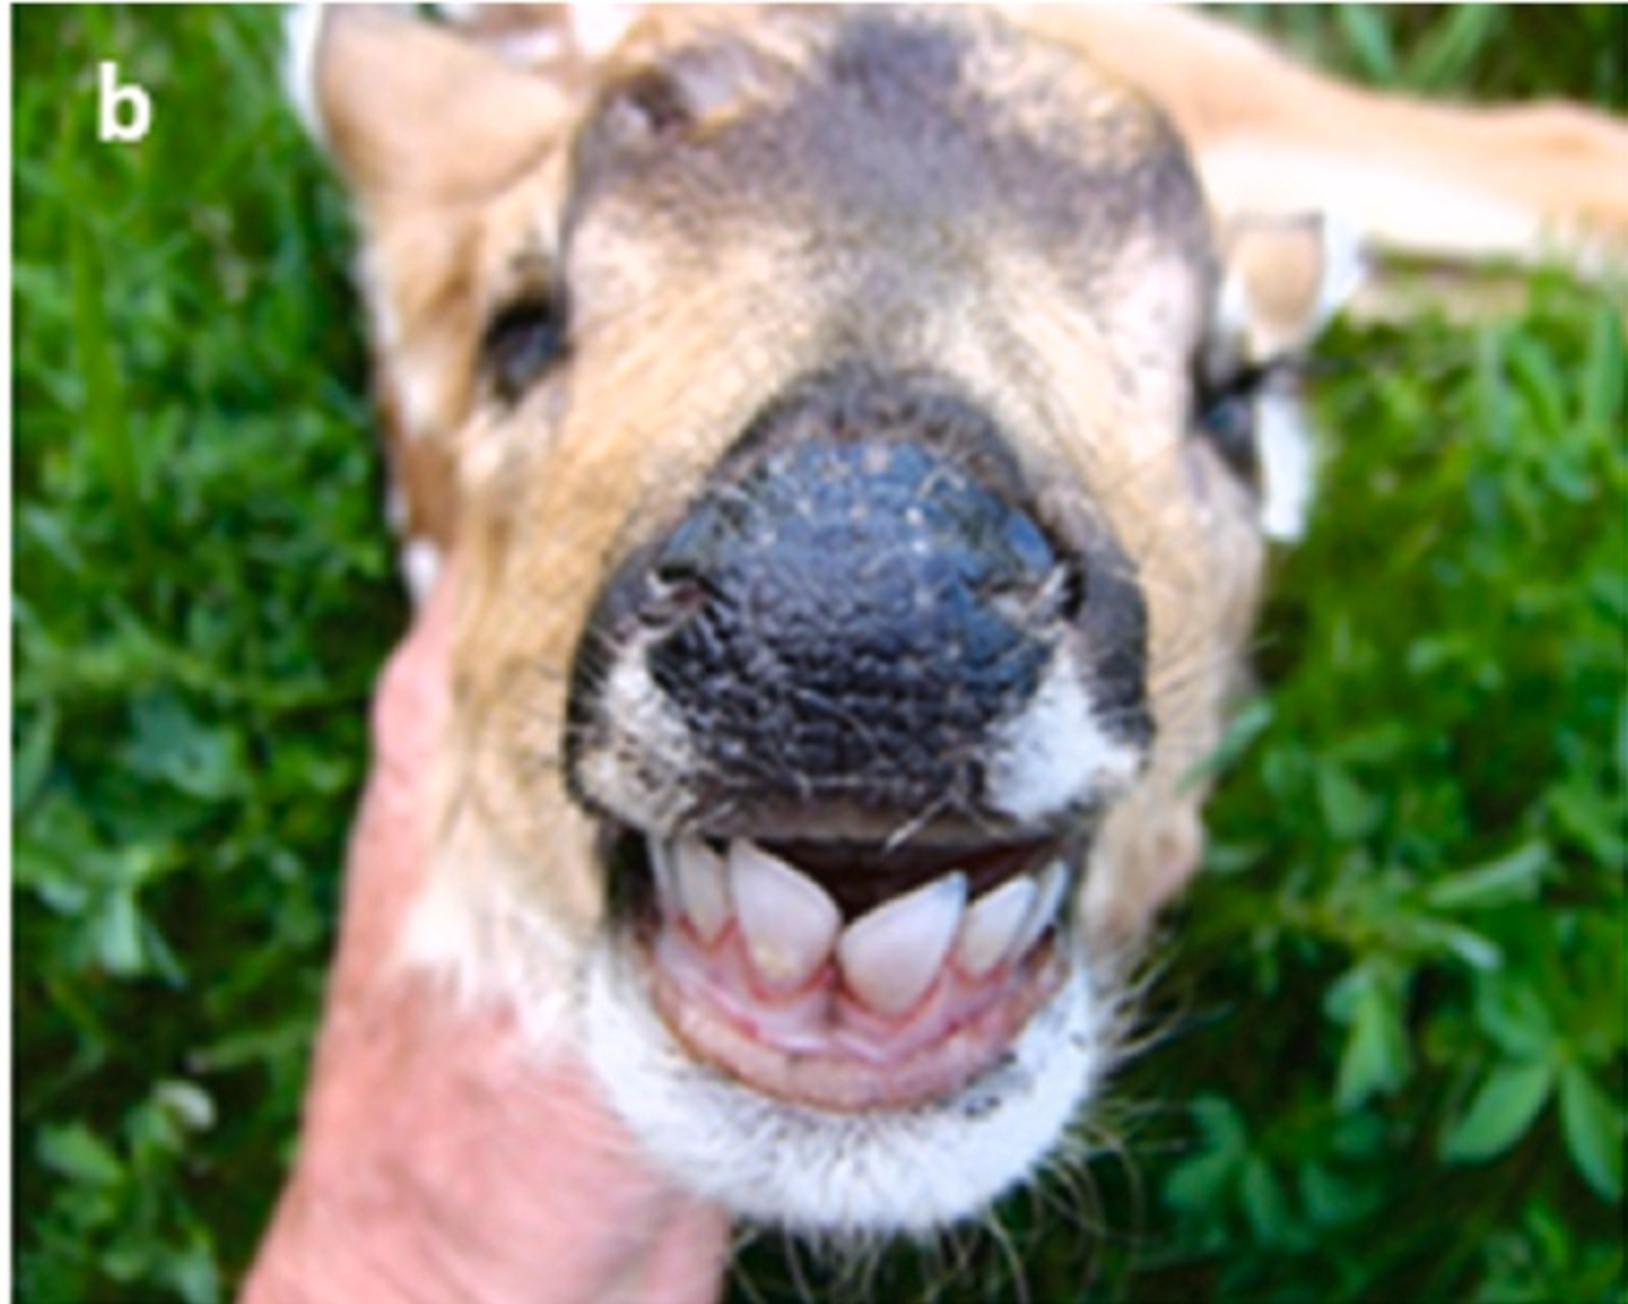 This mule-deer fawn displays a severe underbite, crooked teeth, and incisors much wider than its underdeveloped dental pad. Photo courtesy Chemosphere